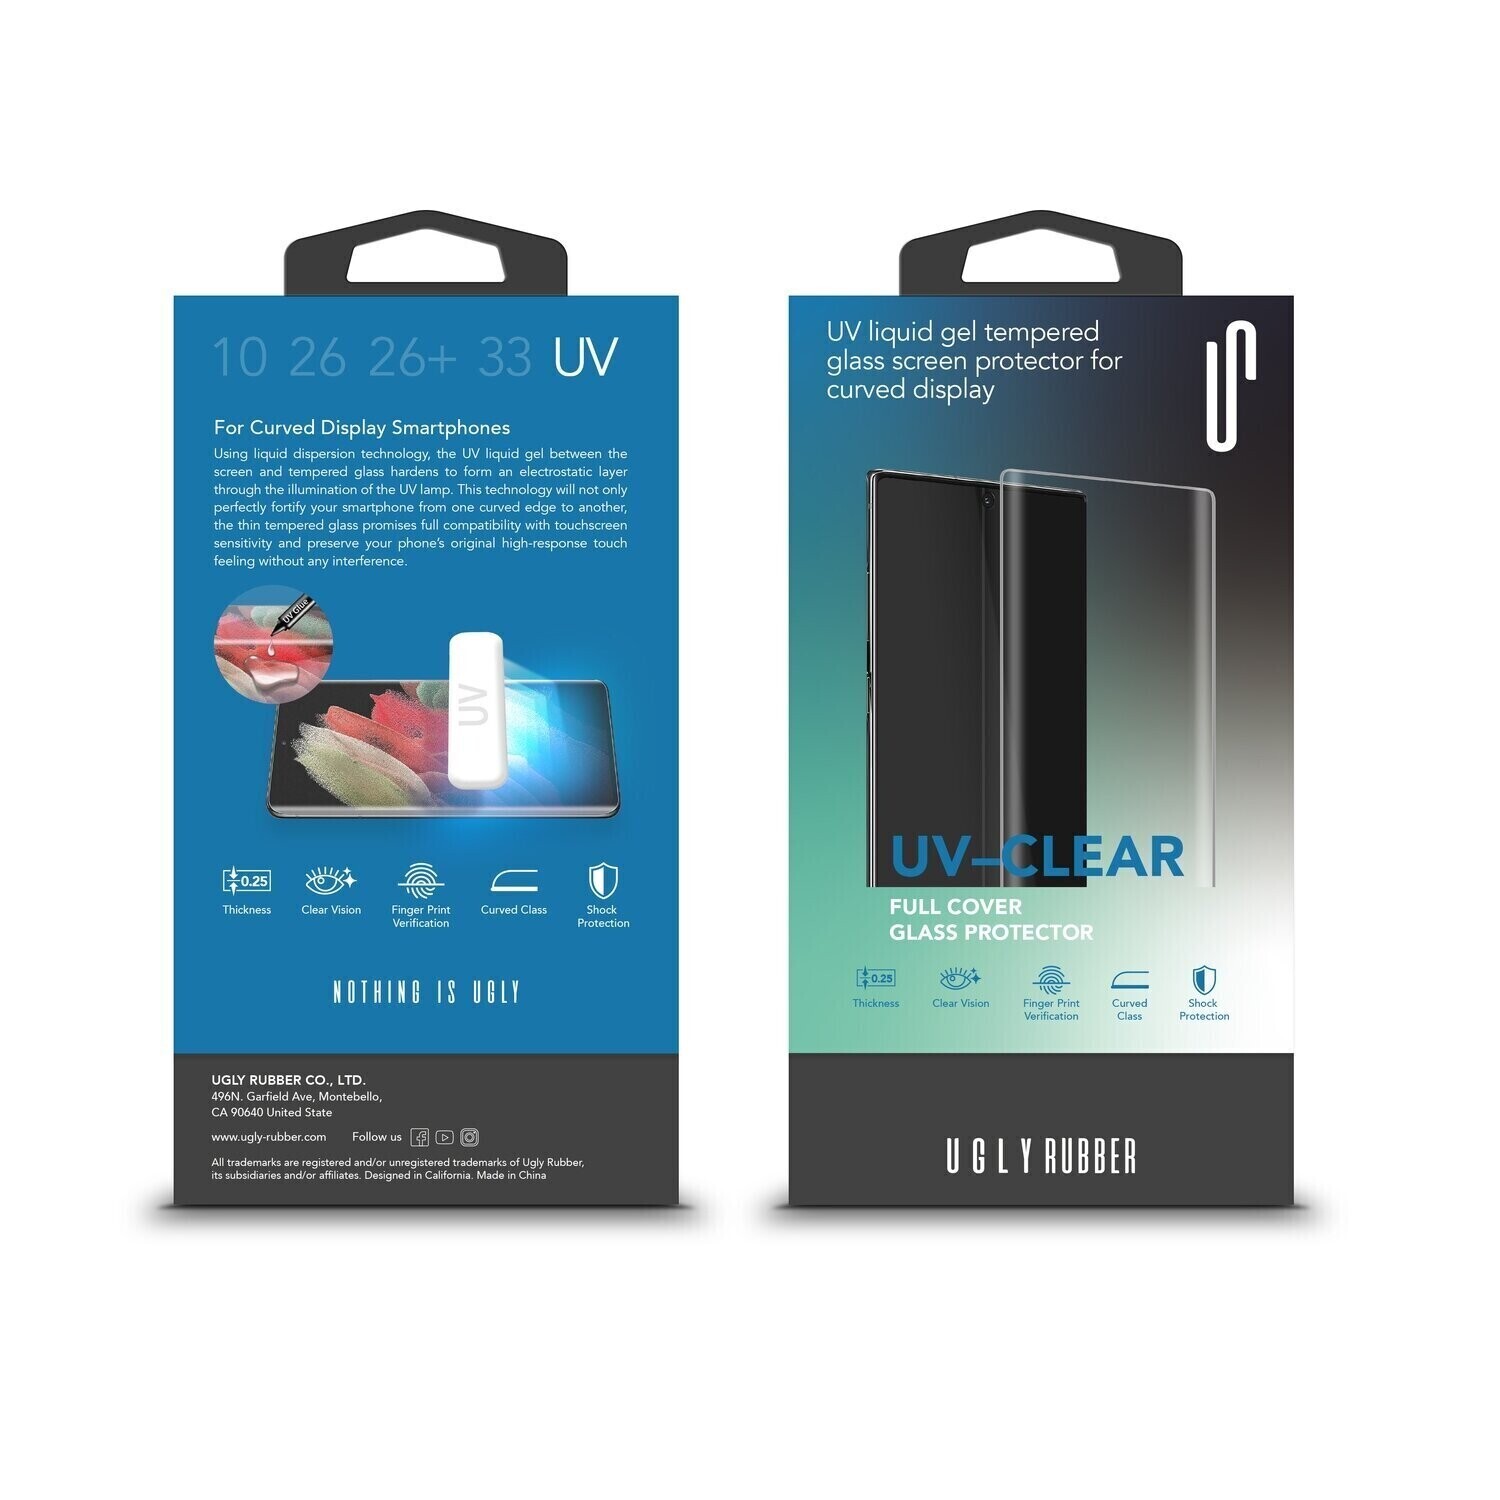 Ugly Rubber Oneplus 8 Pro UV Liquid Gel Tempered Glass, Clear